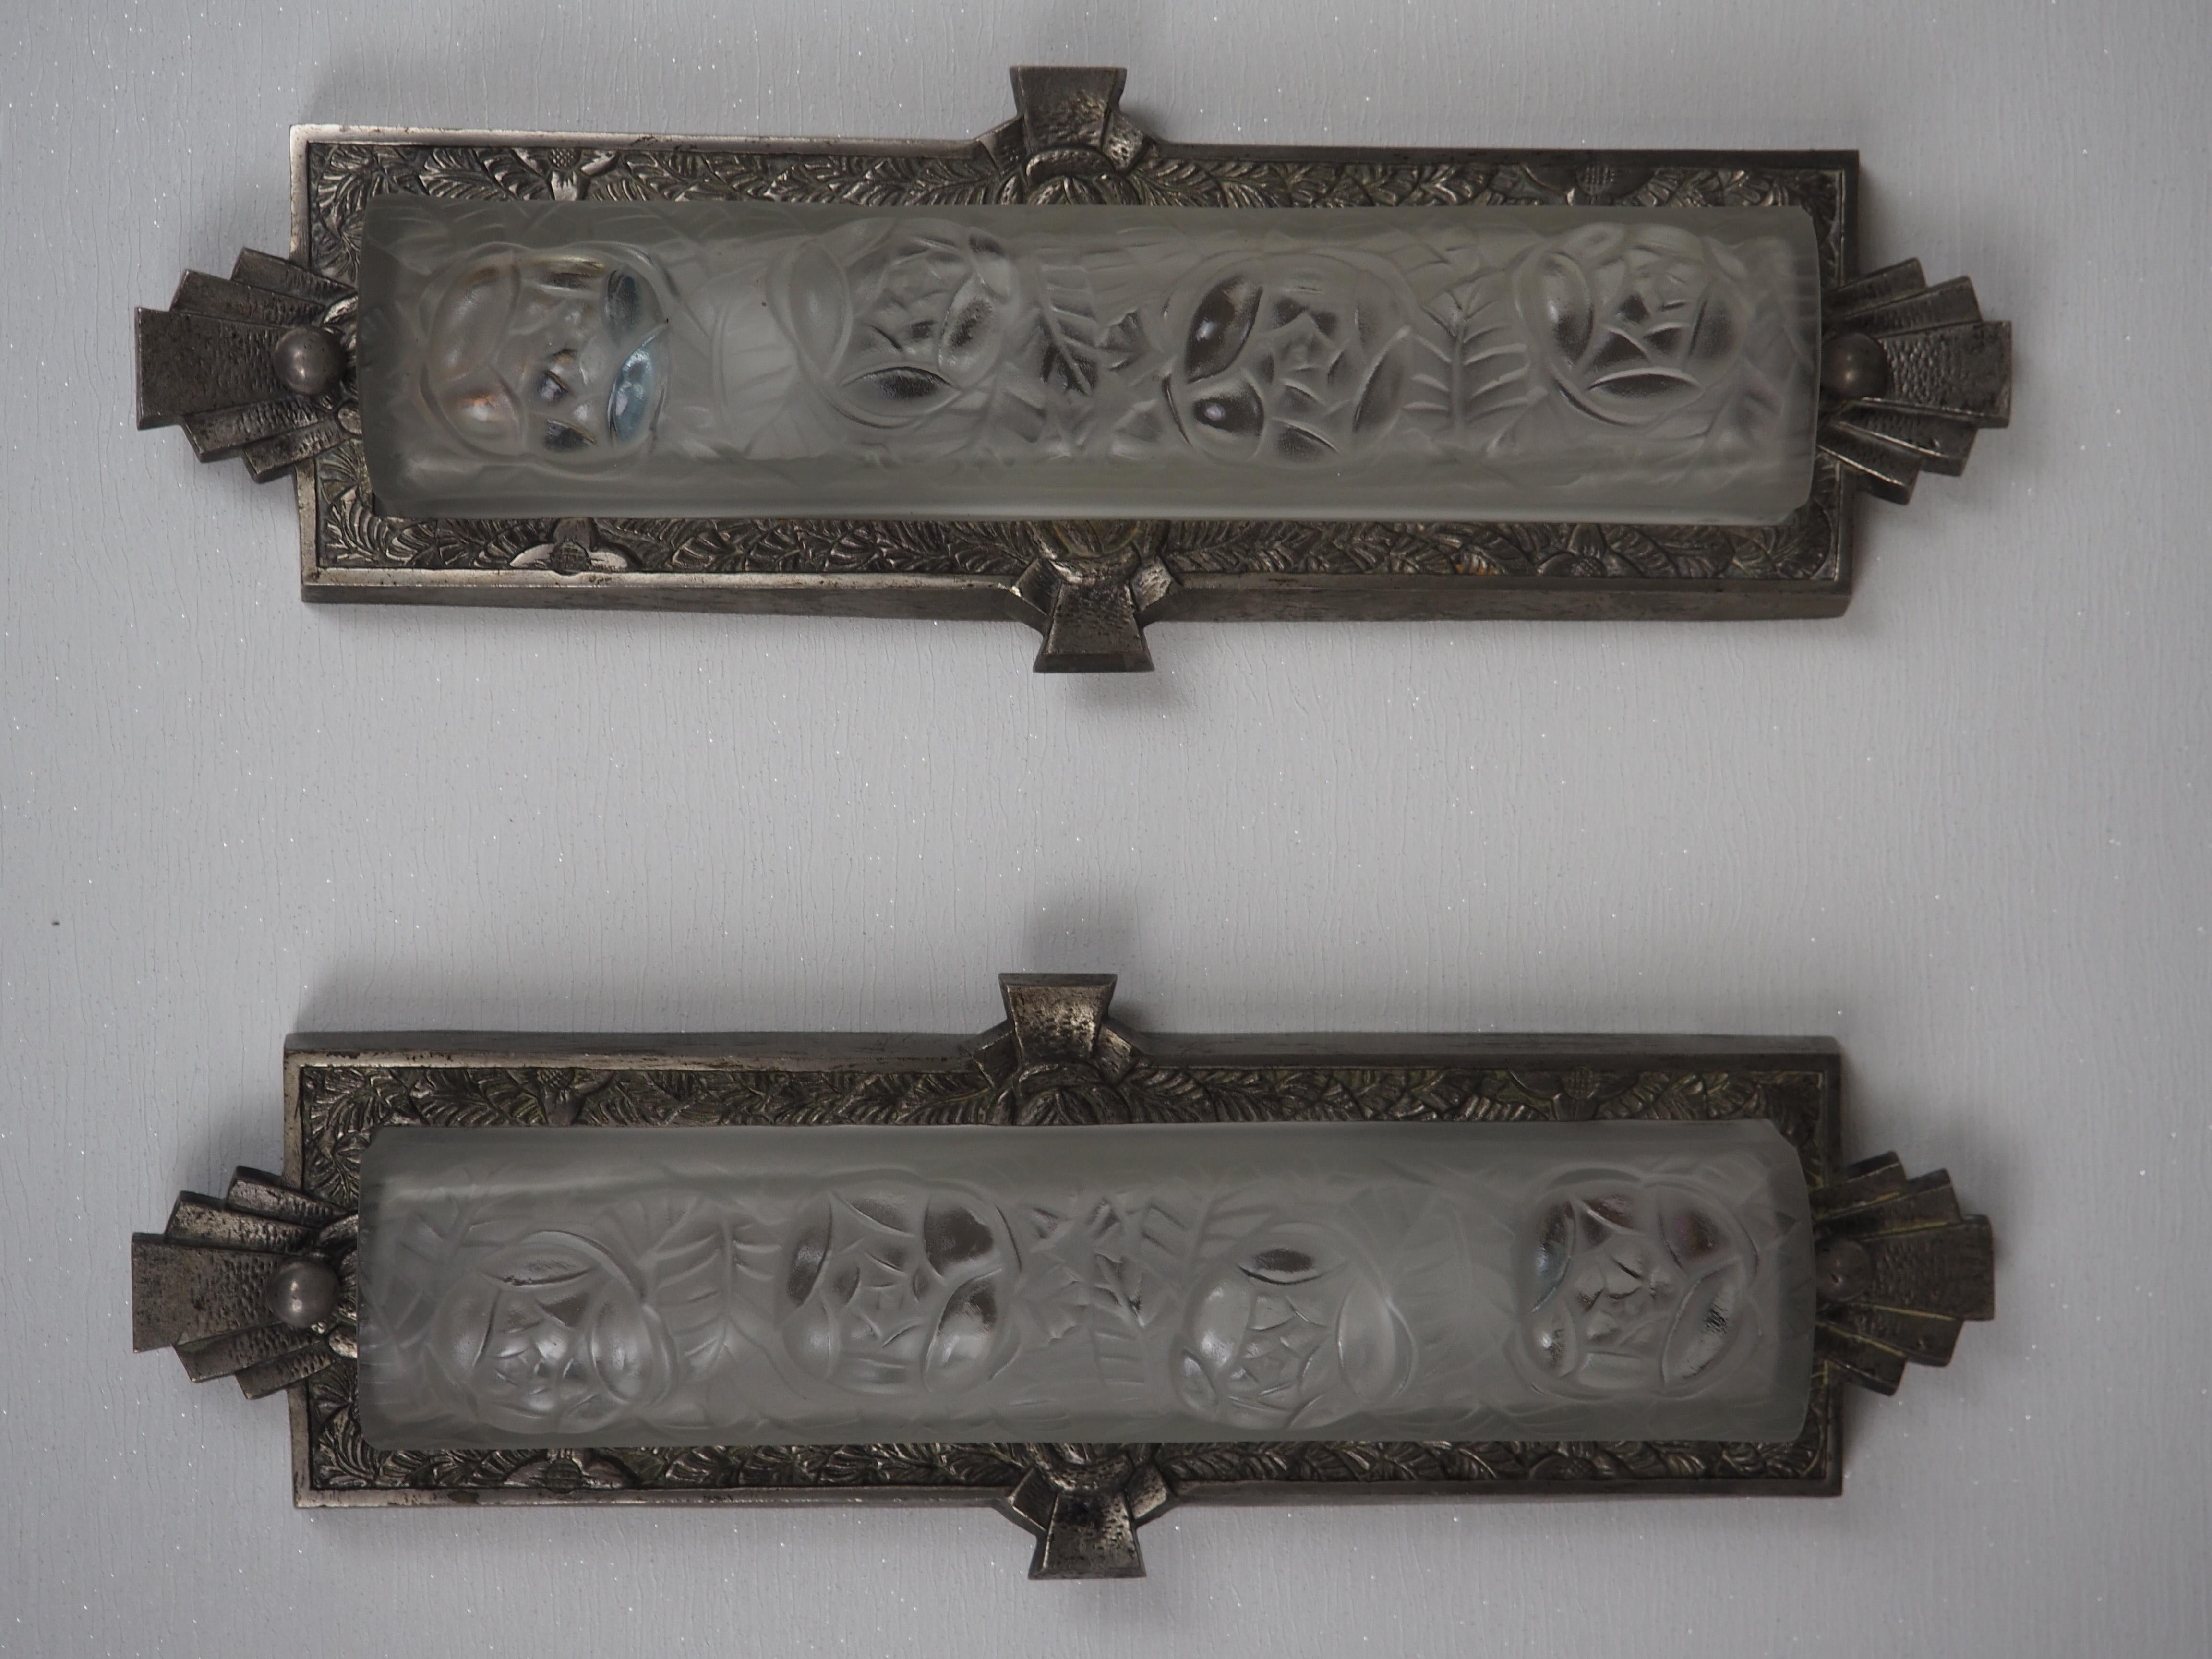 Wonderful pair of french wall sconces by Degue, France, circa 1920s.
The wall sconces are made of nickeled bronze ( with wonderful patination) and glass.
New rewired for US standards.

   